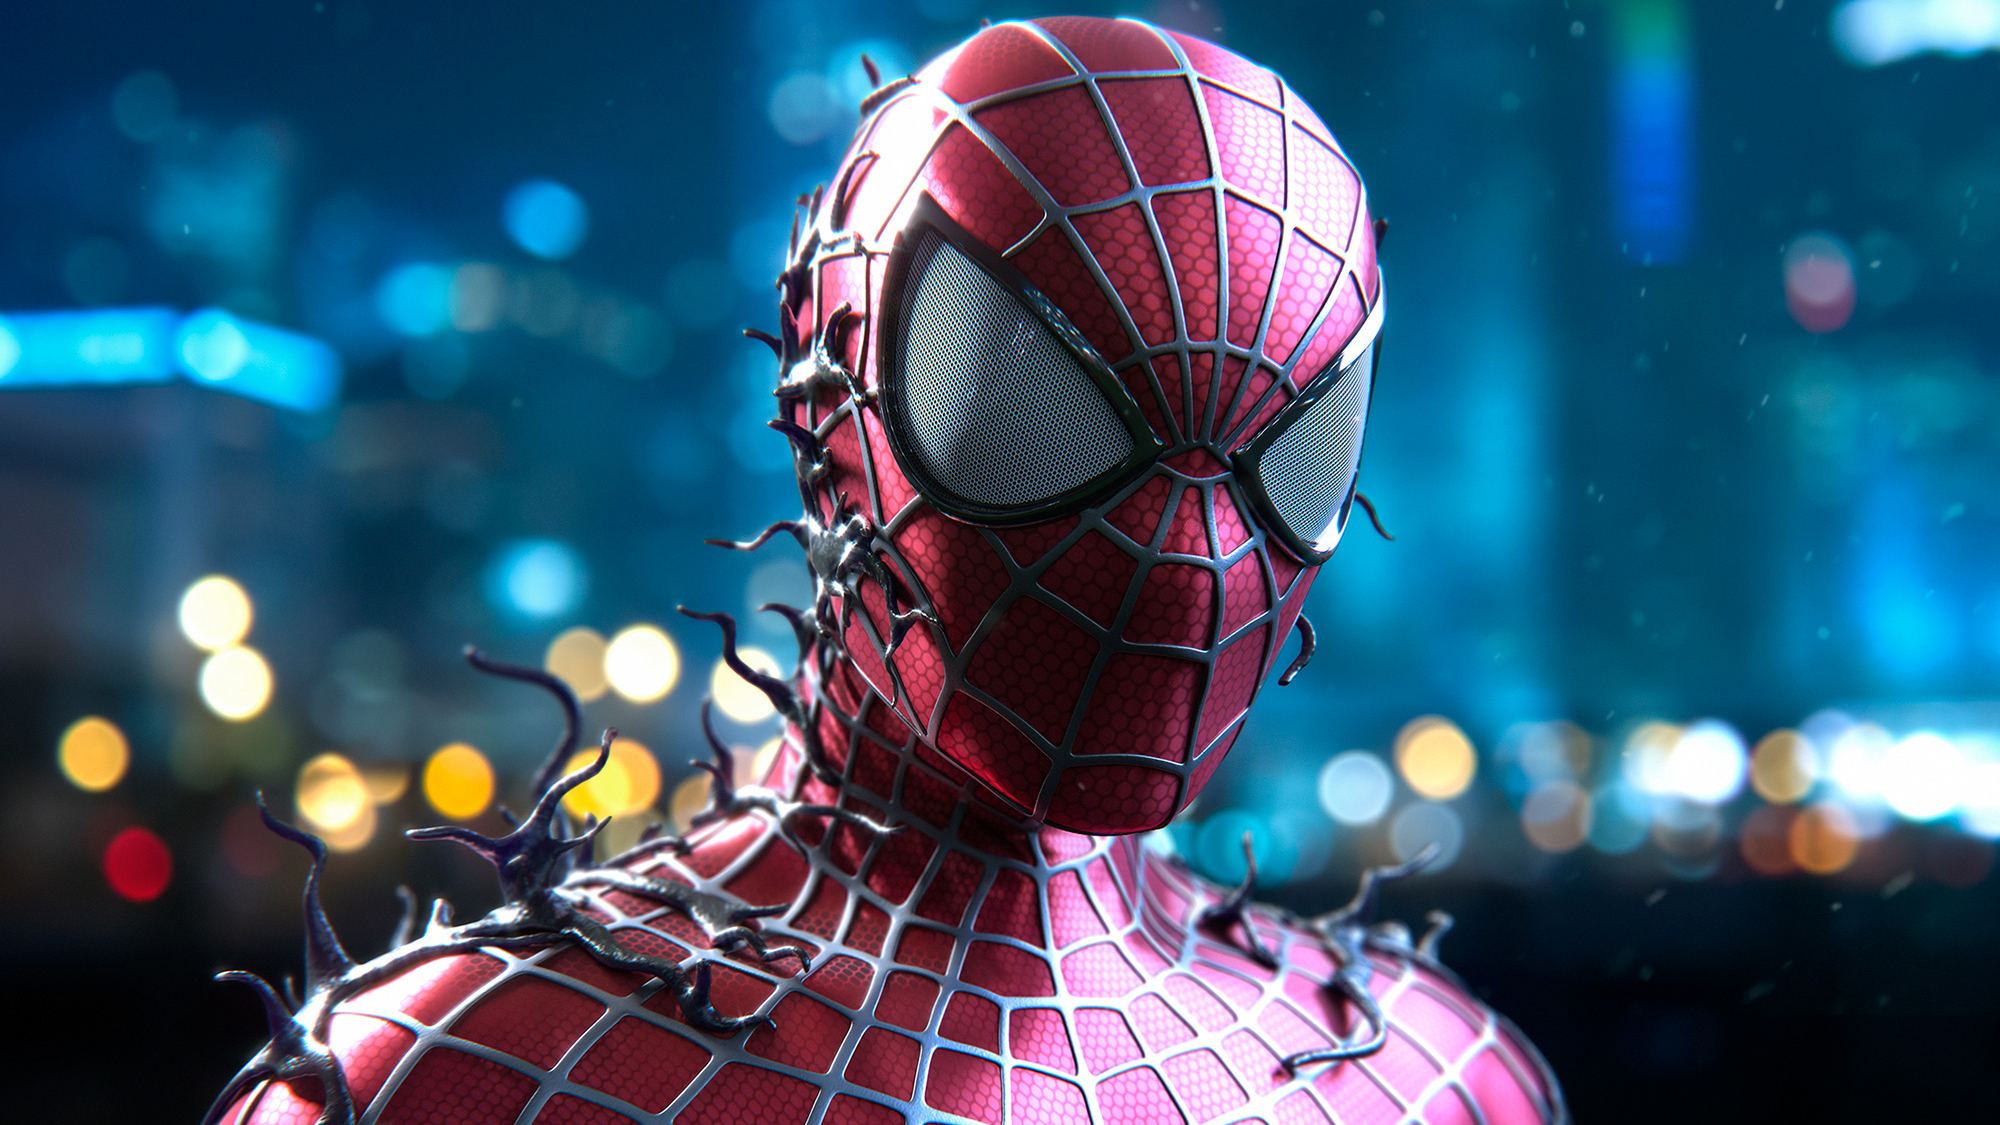 hd wallpapers for mobile spiderman Hd spider man desktop wallpapers (67+ images)